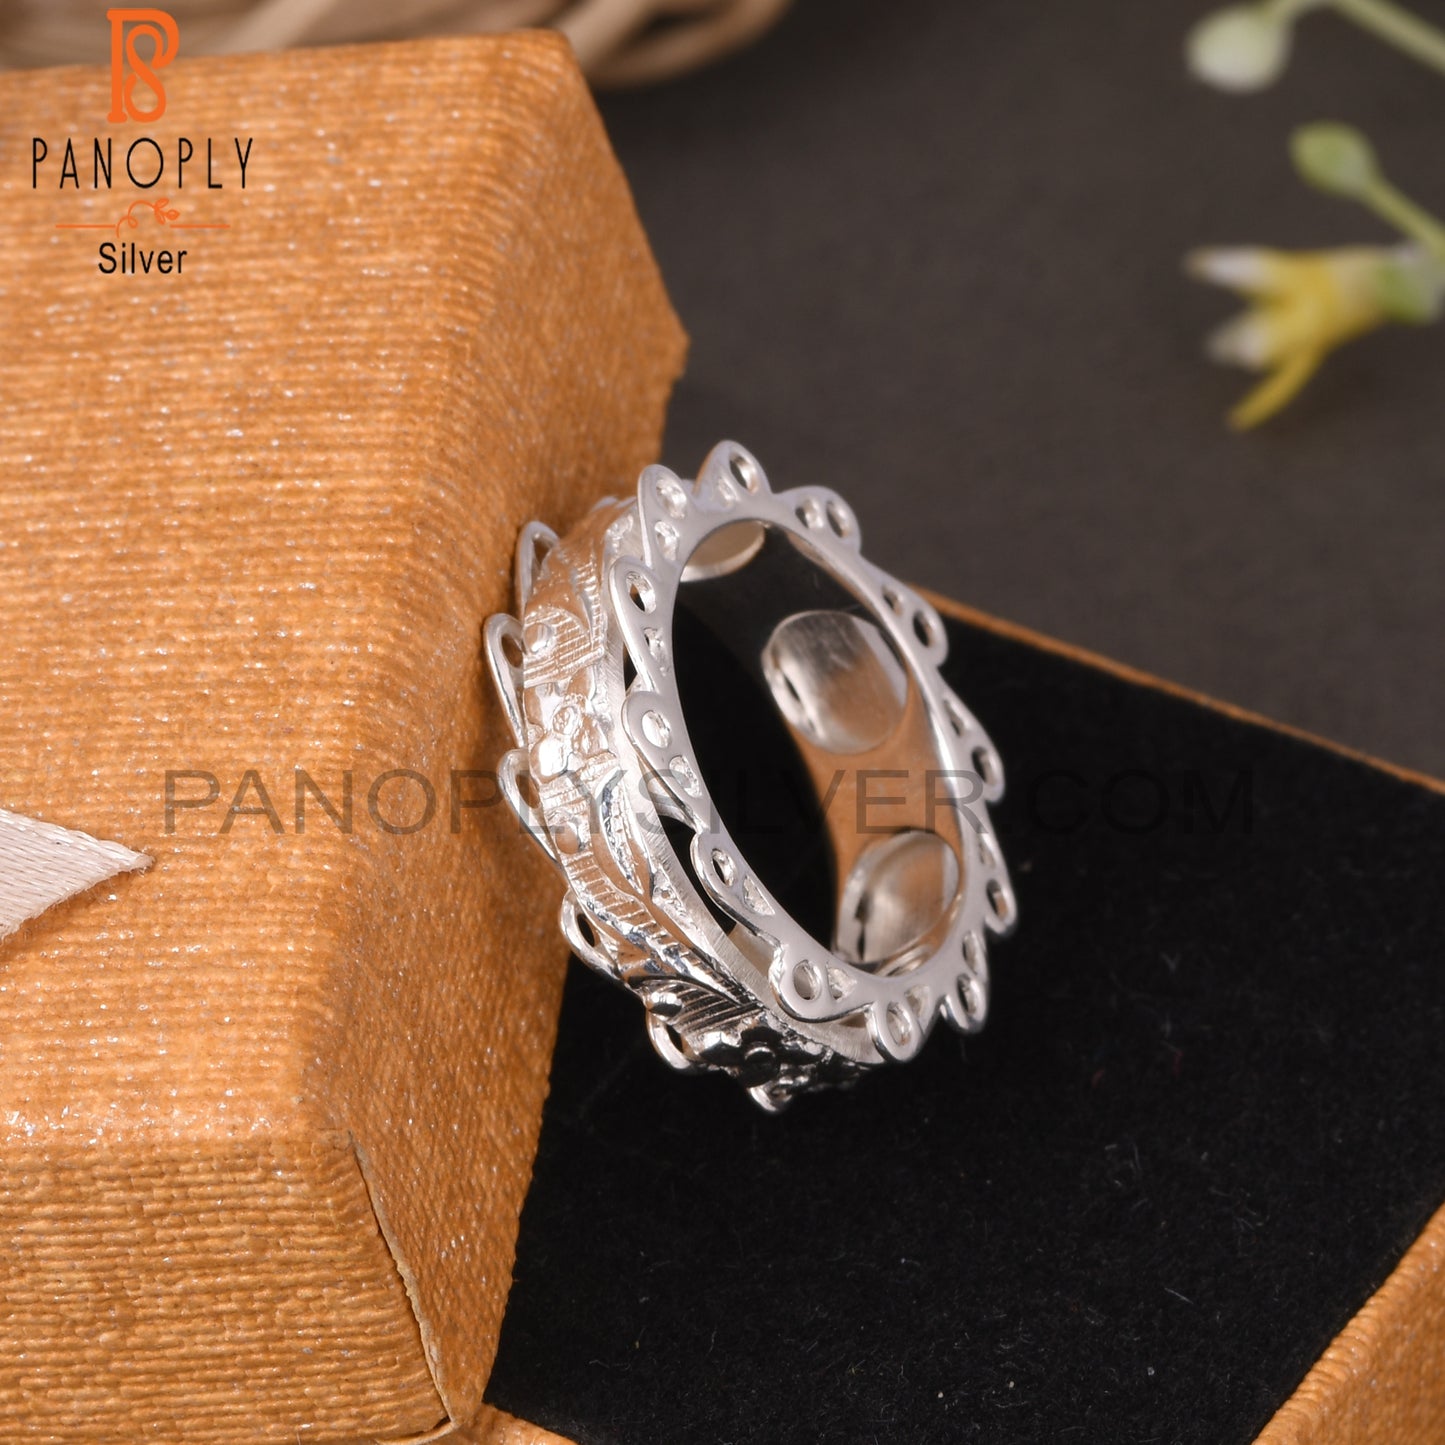 Handmade 925 Sterling Silver Floral Pattern Ring